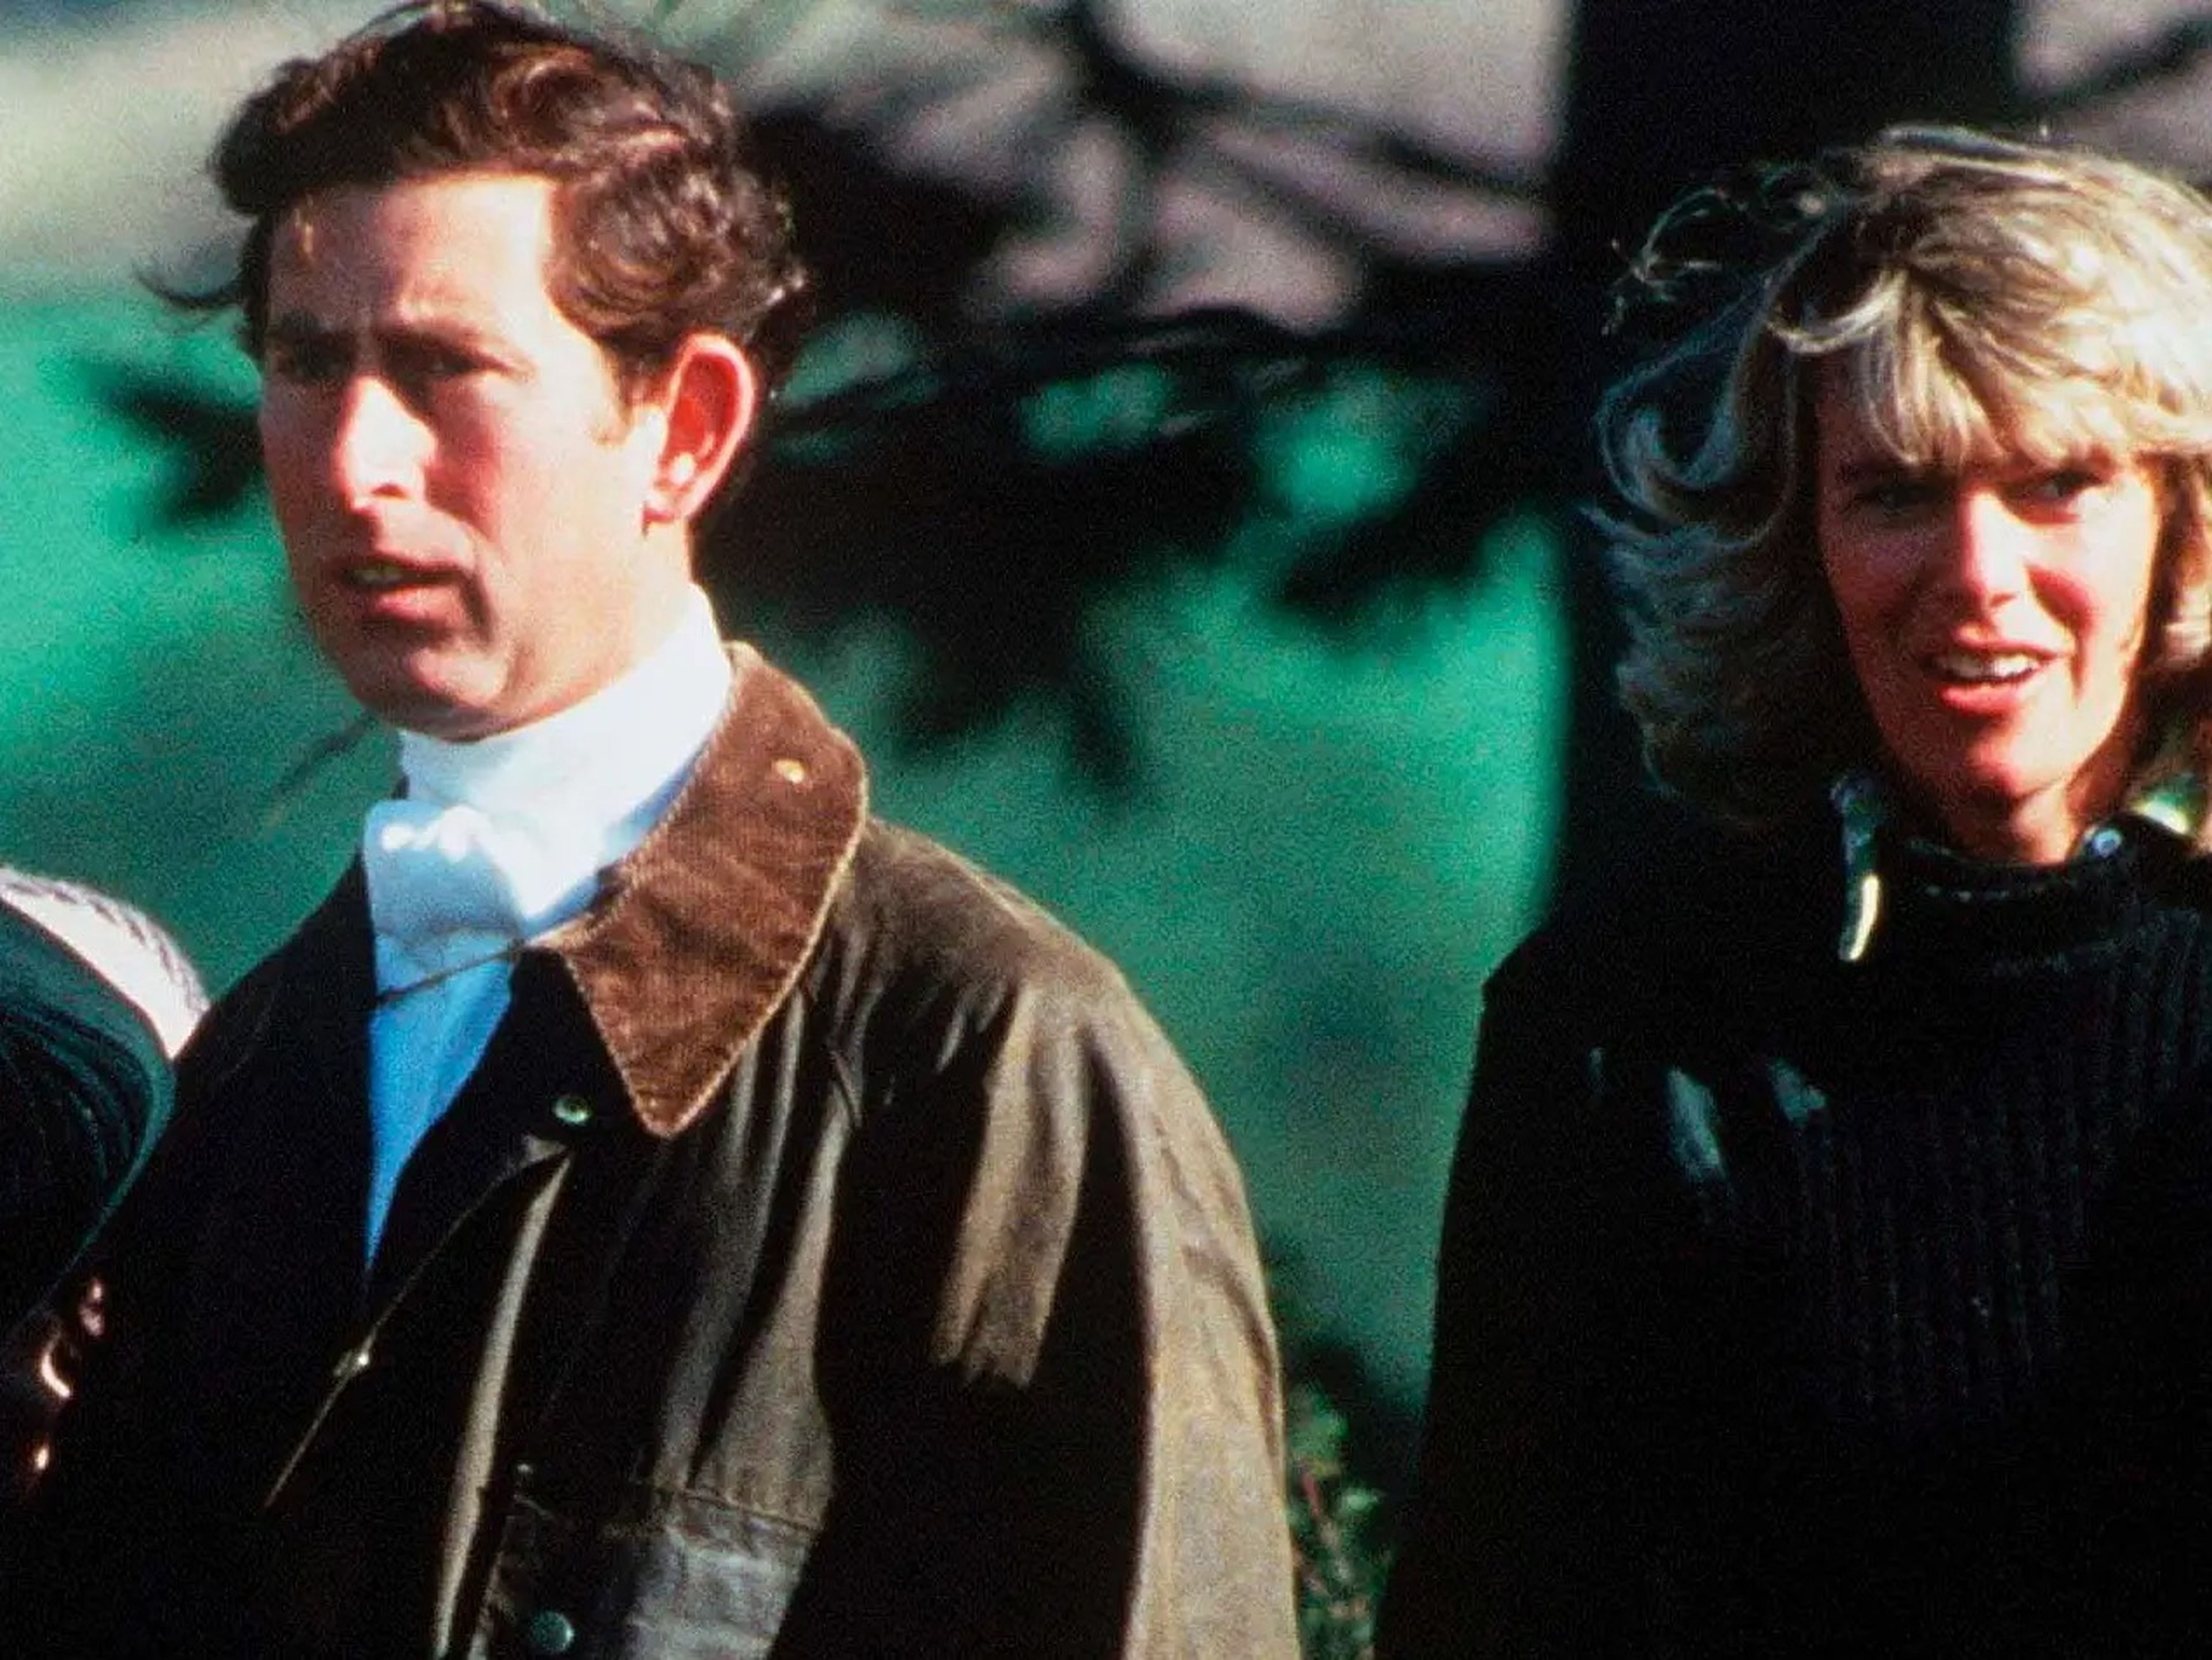 Prince Charles and Camilla Parker Bowles in 1979. / Getty Images.